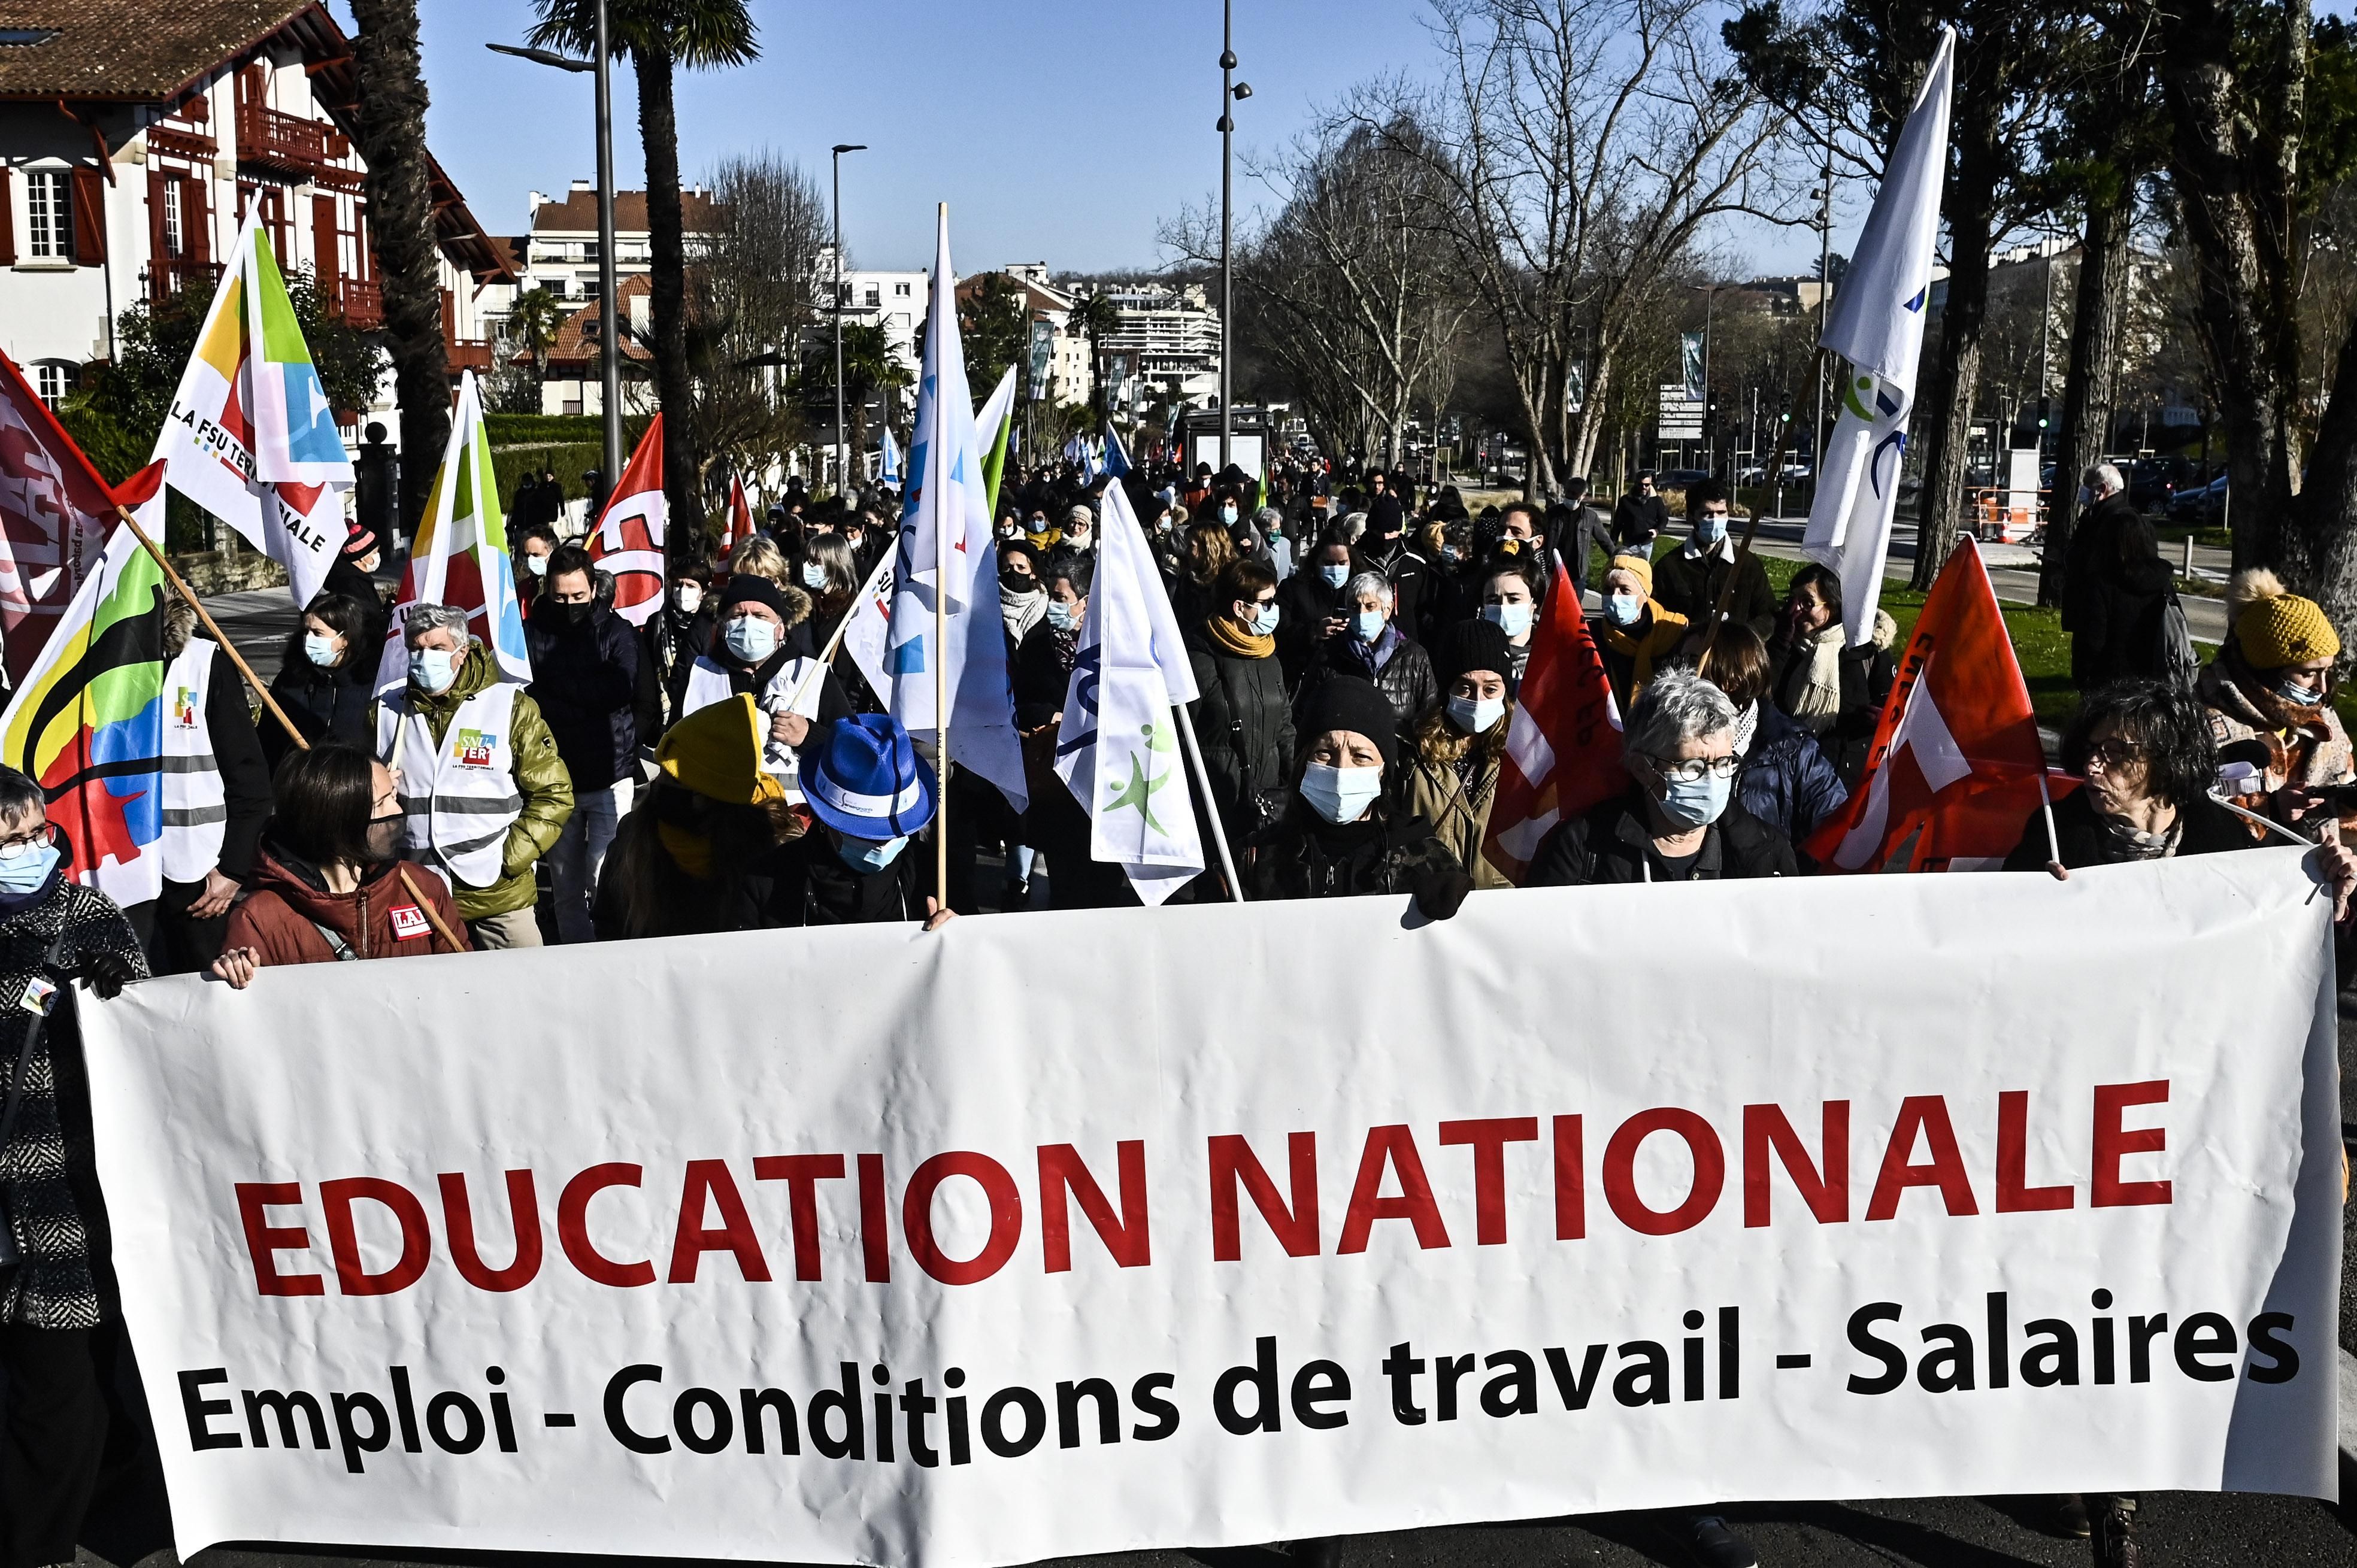 Hard Numbers: French teachers strike, Spanish doctors compensated, Lula soaring in Brazil, Biden pledges more COVID tests